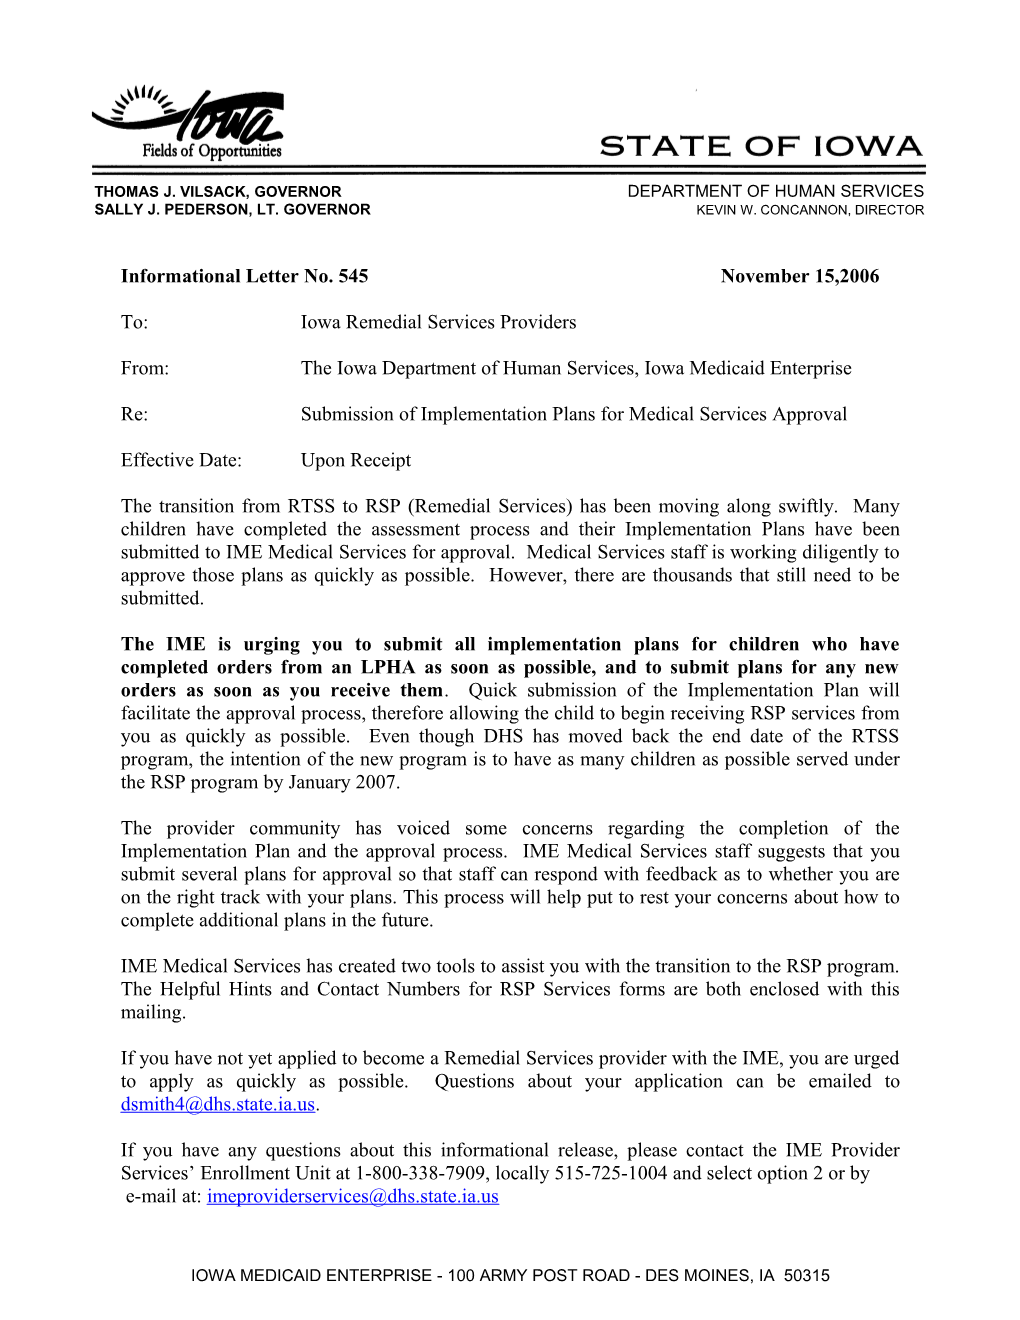 Department of Human Services Letterhead s11